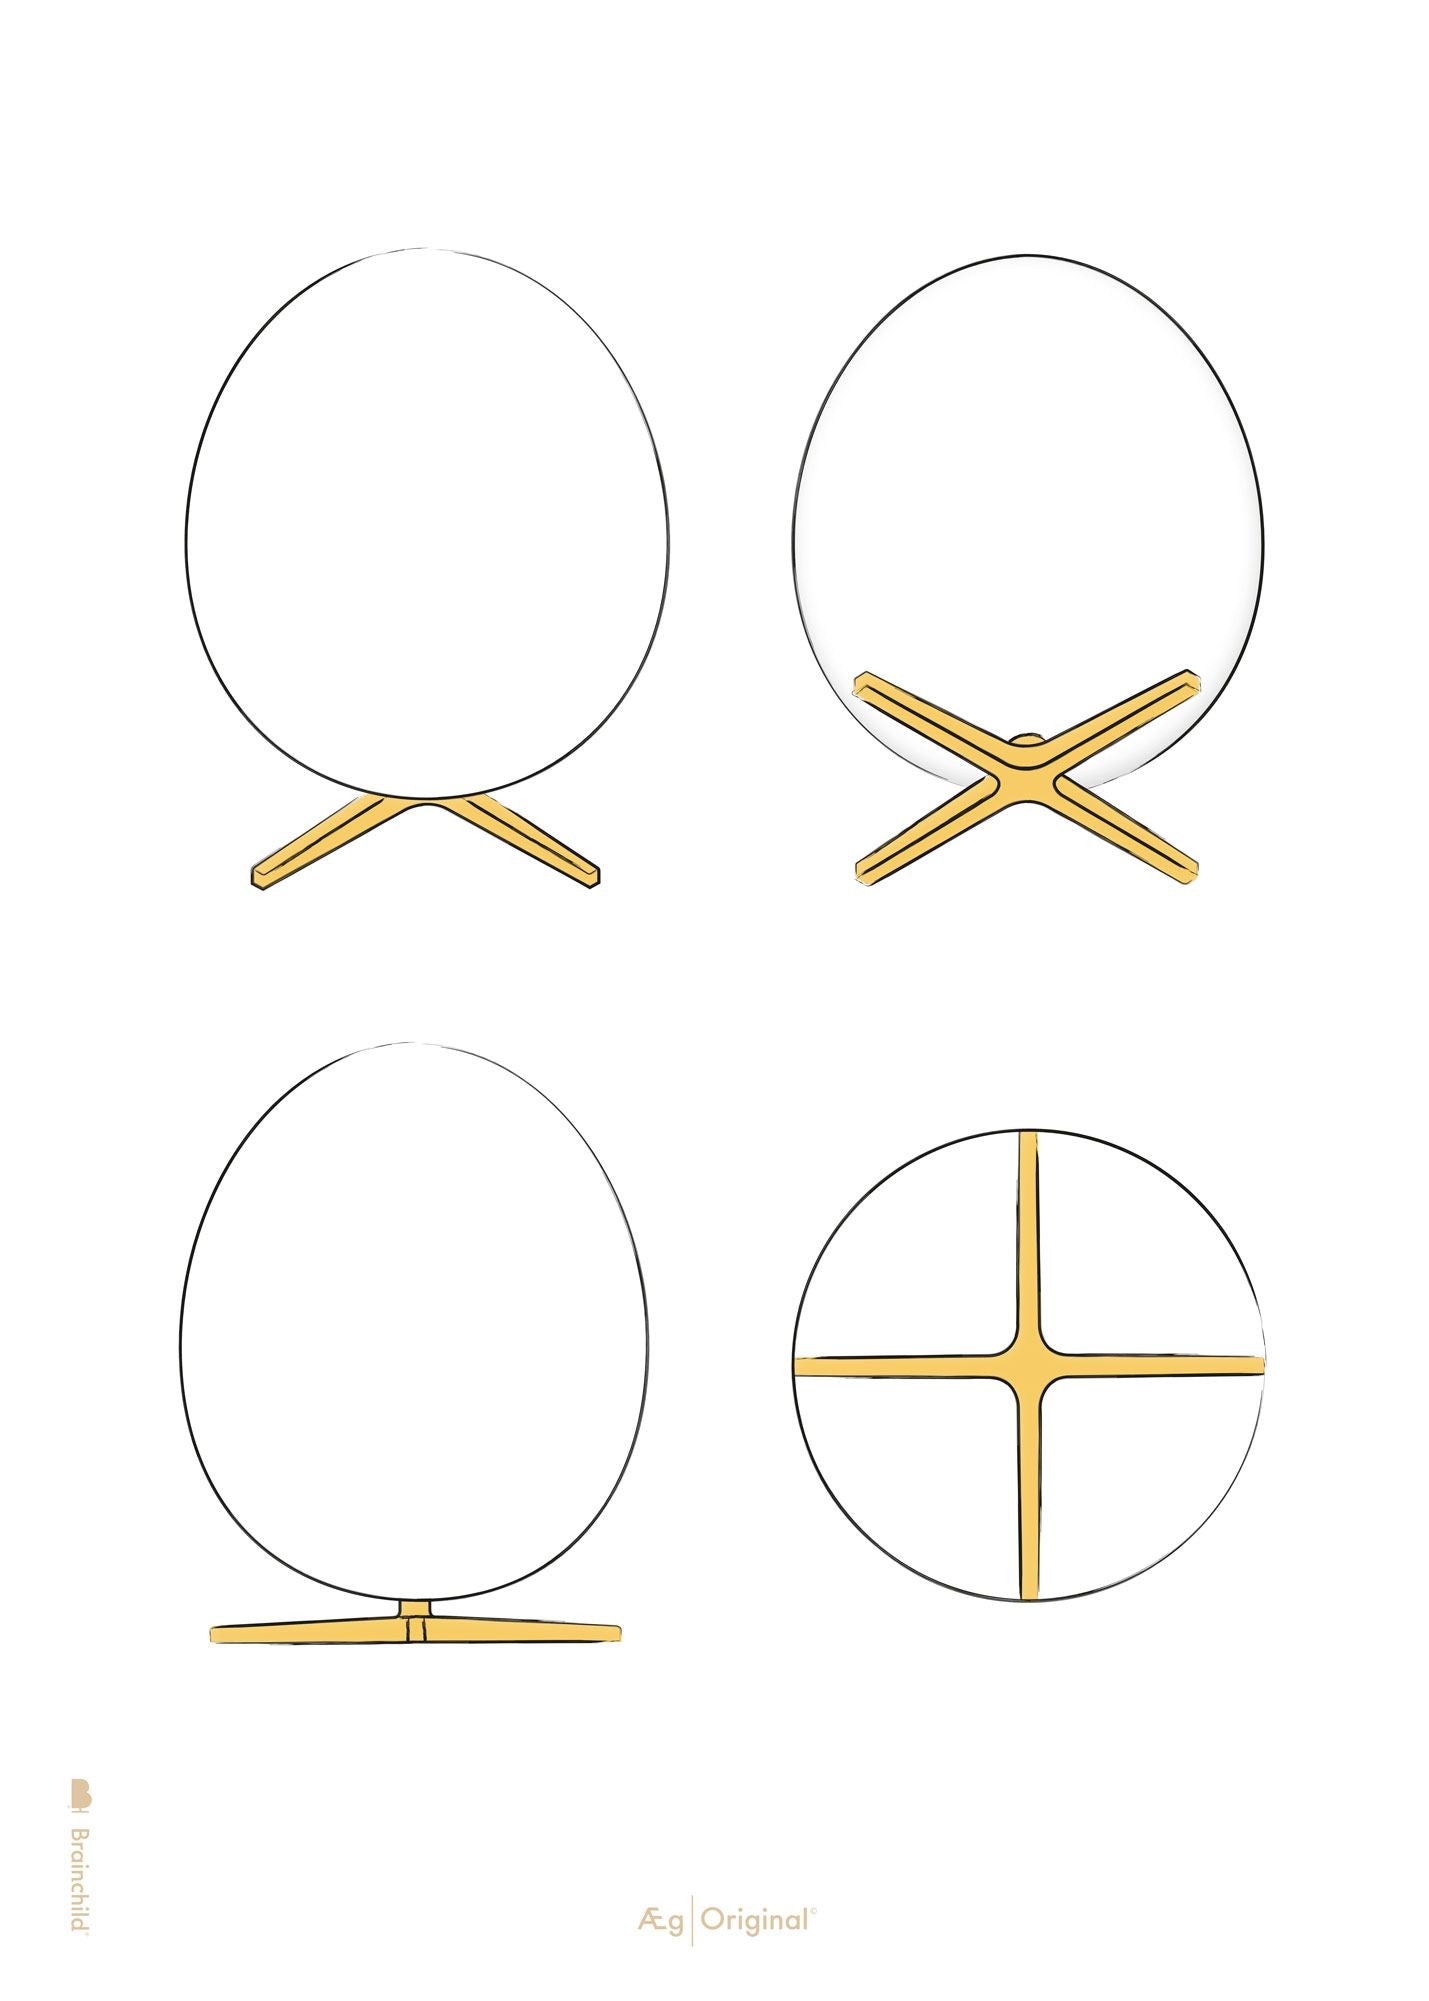 Brainchild The Egg Design Sketches Poster Without Frame 70x100 Cm, White Background